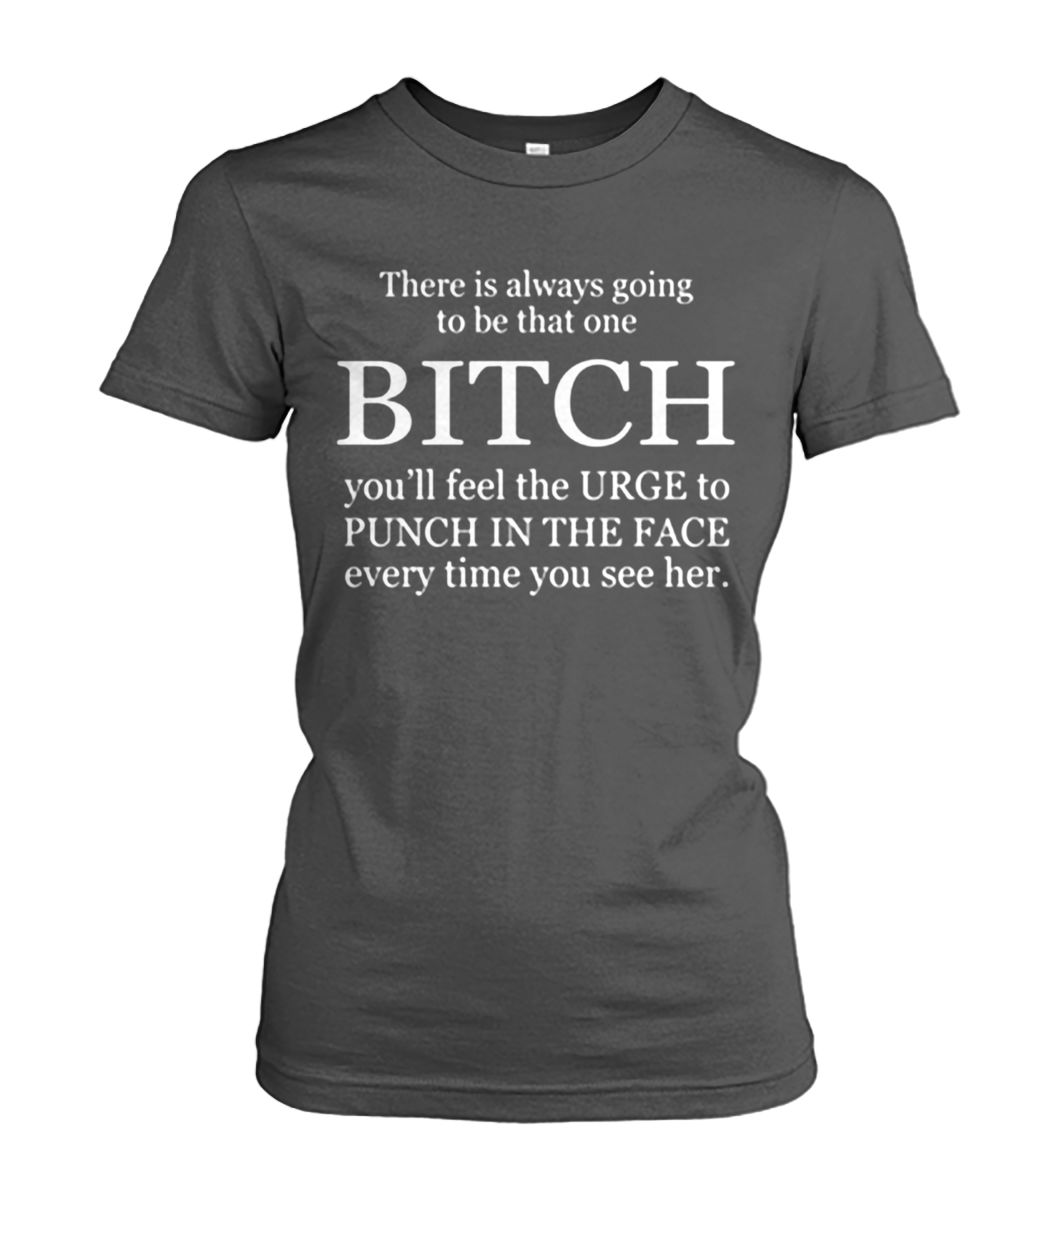 There is always going to be that one bitch you'll feel the urge women's crew tee